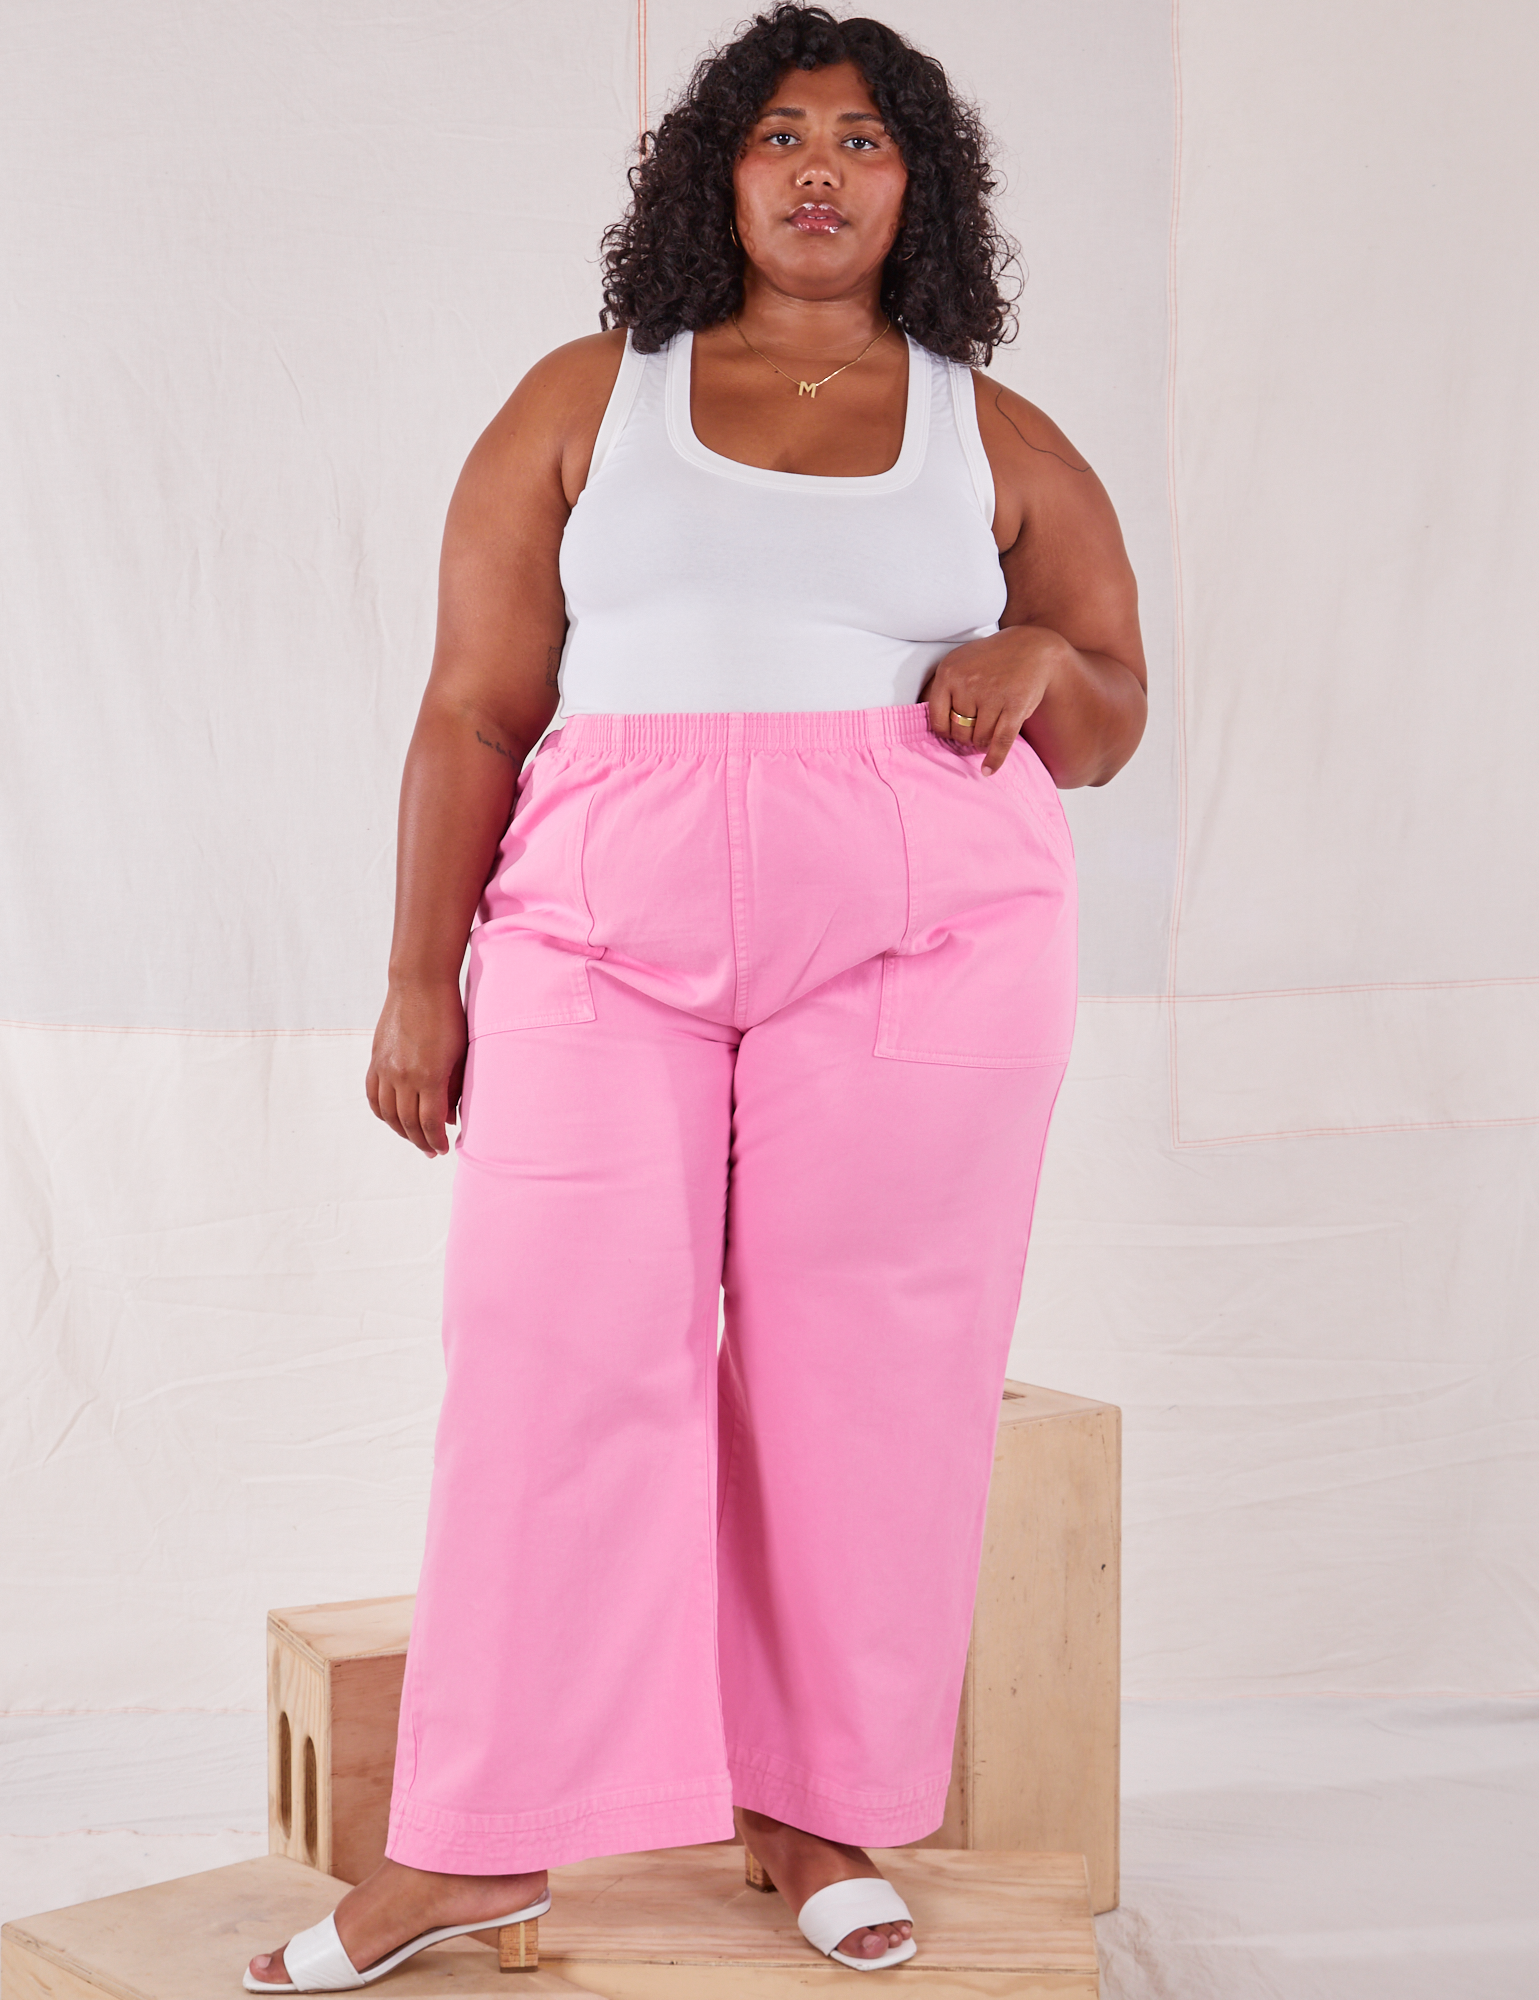 Morgan is 5&#39;5&quot; and wearing 2XL Action Pants in Bubblegum Pink paired with a Tank Top in vintage tee off-white